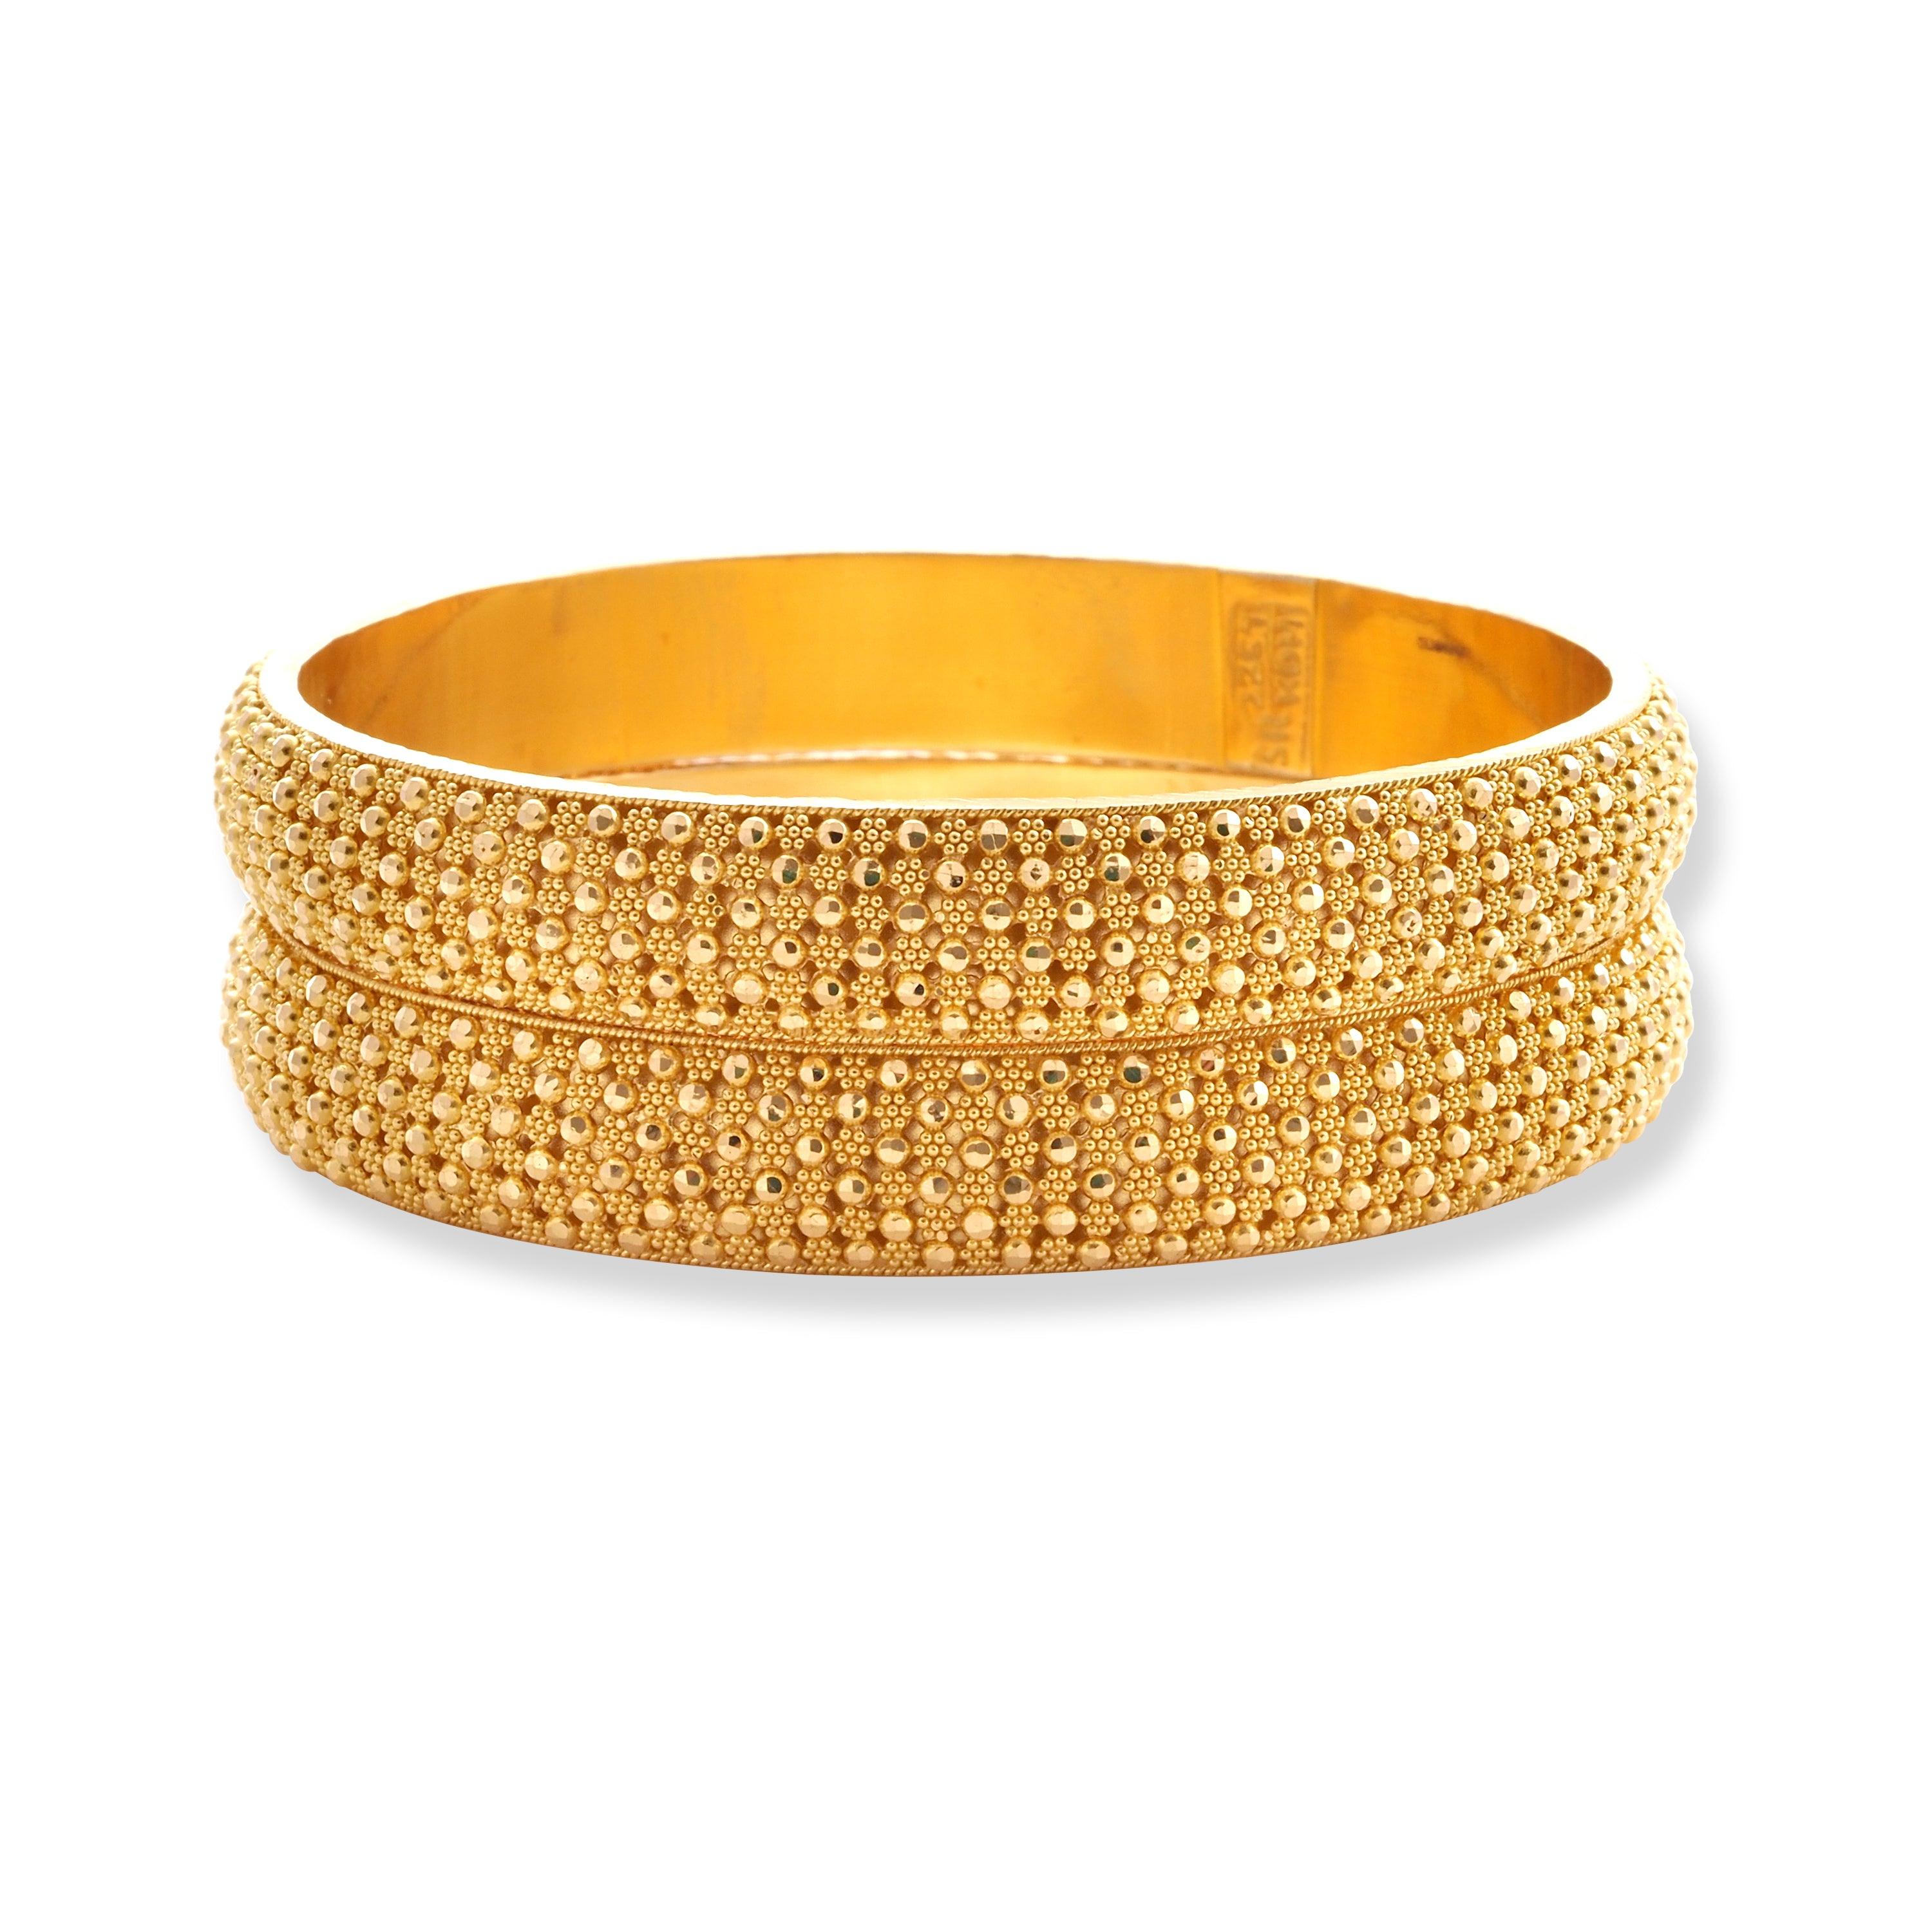 22ct Gold Pair of Bangles in Diamond Cut Bead Design with Filigree Work & Comfort fit Finish B-8581 - Minar Jewellers